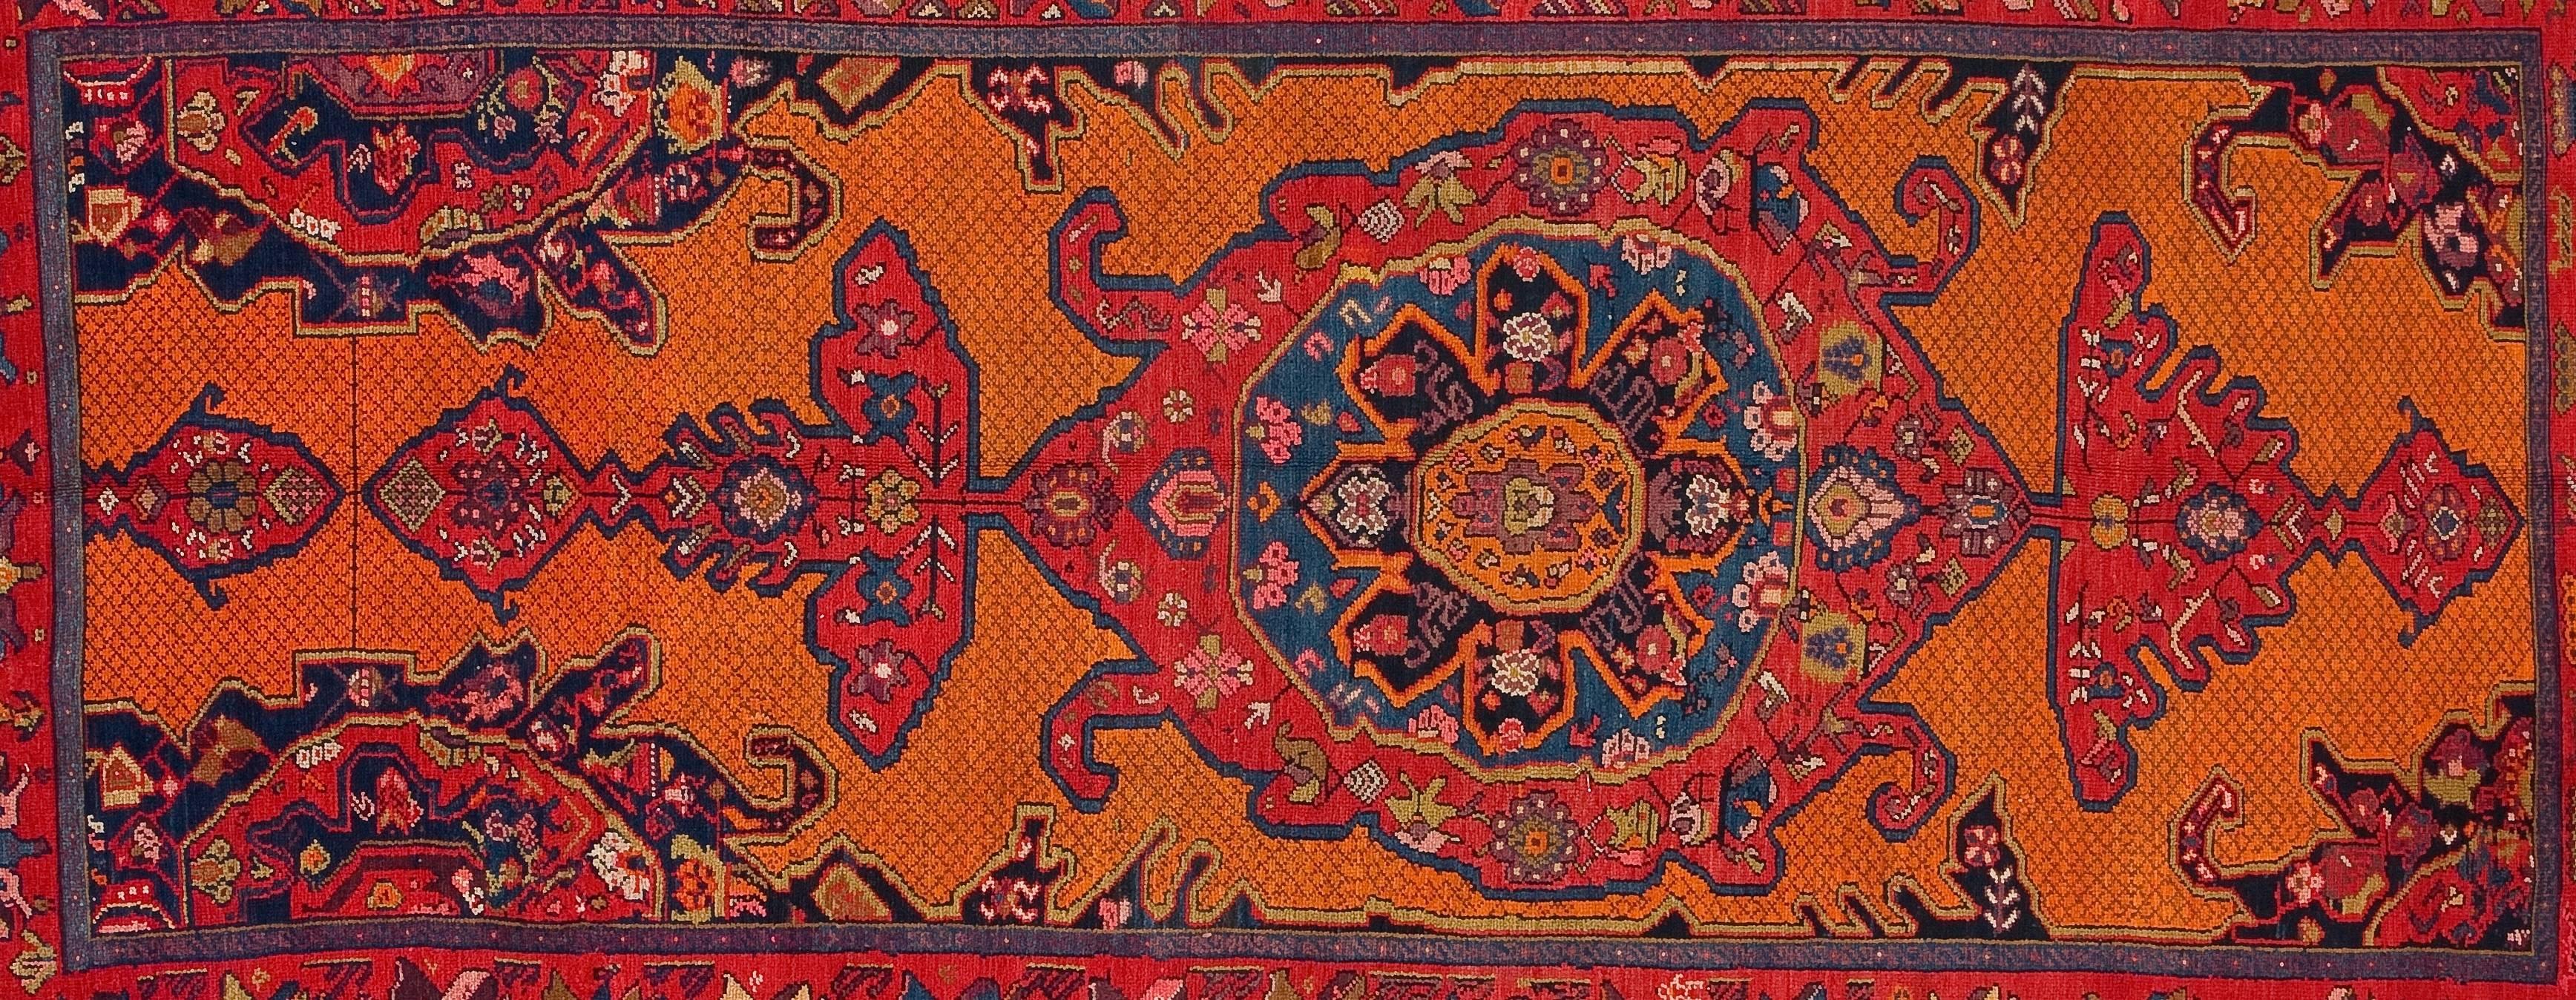 This antique Bokhara Russian piece has at least 70 years old and represent some of the very finest examples of art from the time and place from which they originate. The complex methods and high-quality ingredients employed by the master rug makers